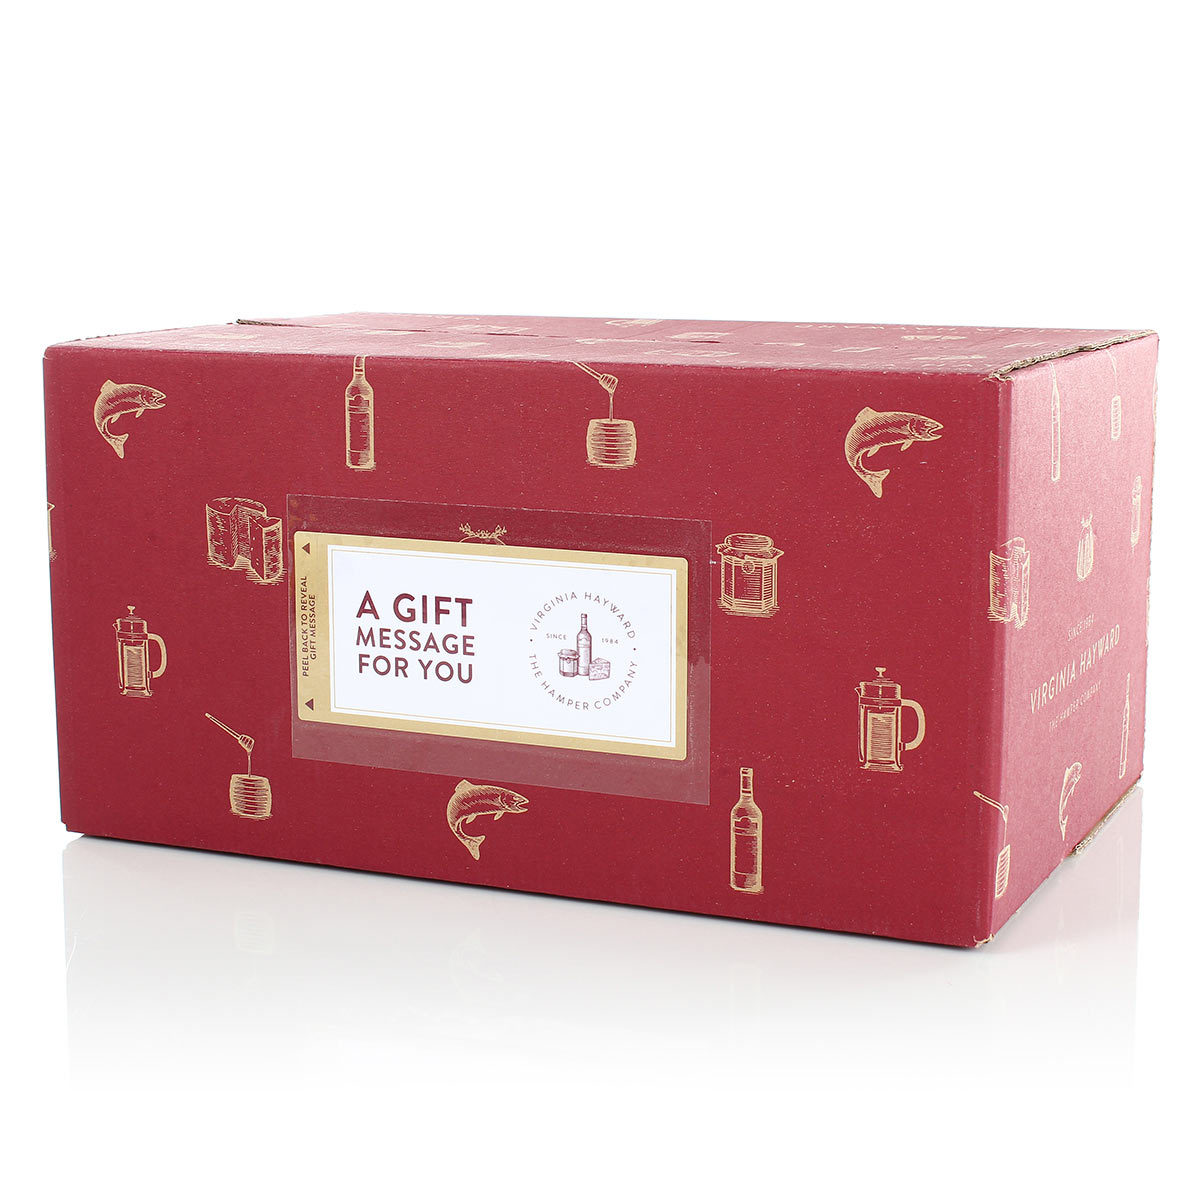 Example of the style of packaging used to deliver this hamper